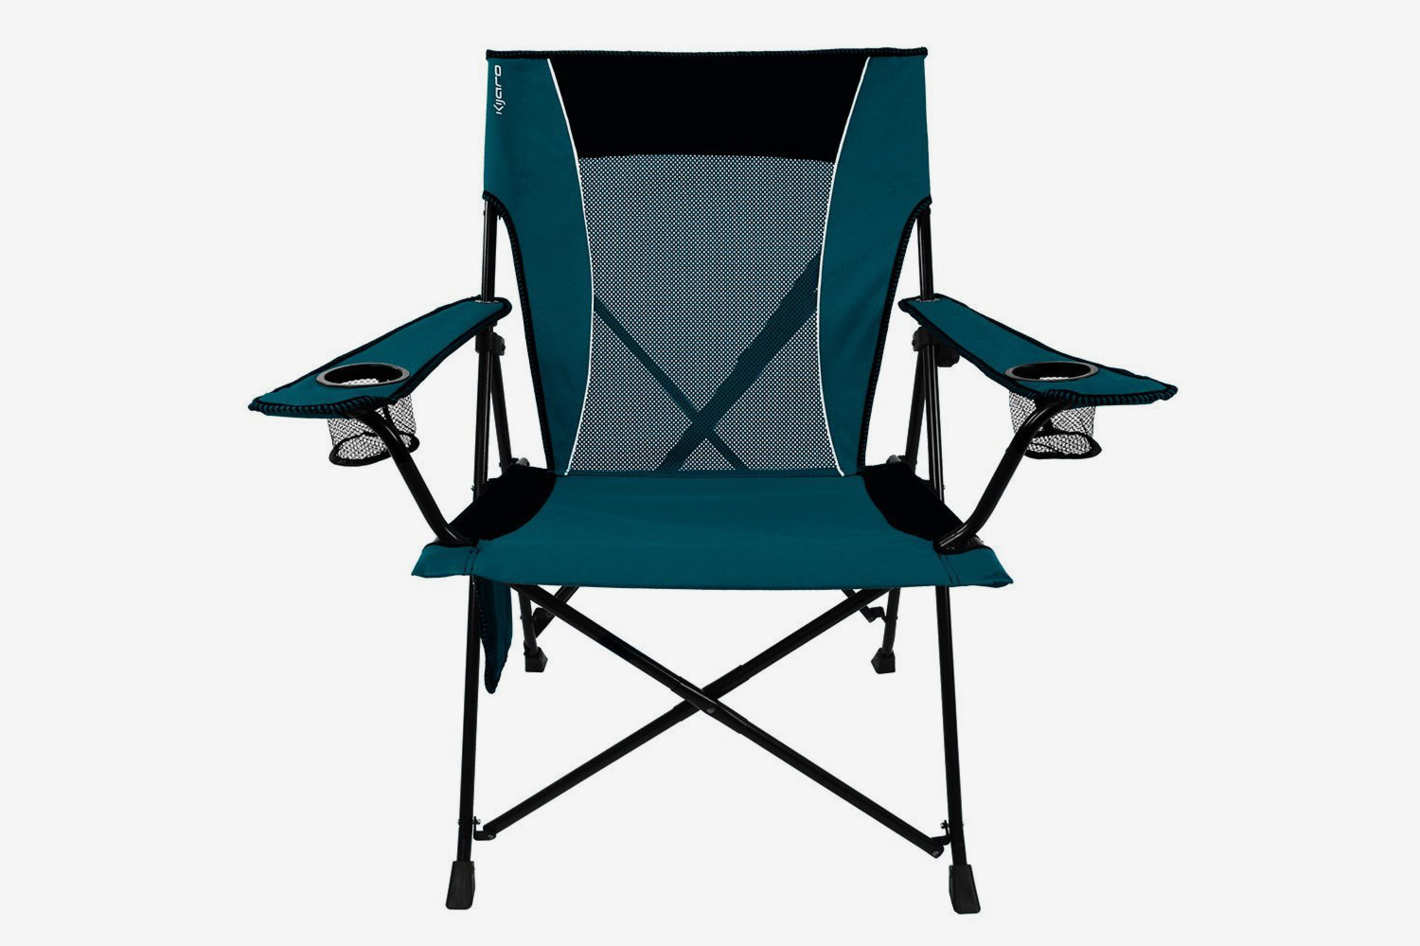 Different types of lawn chairs